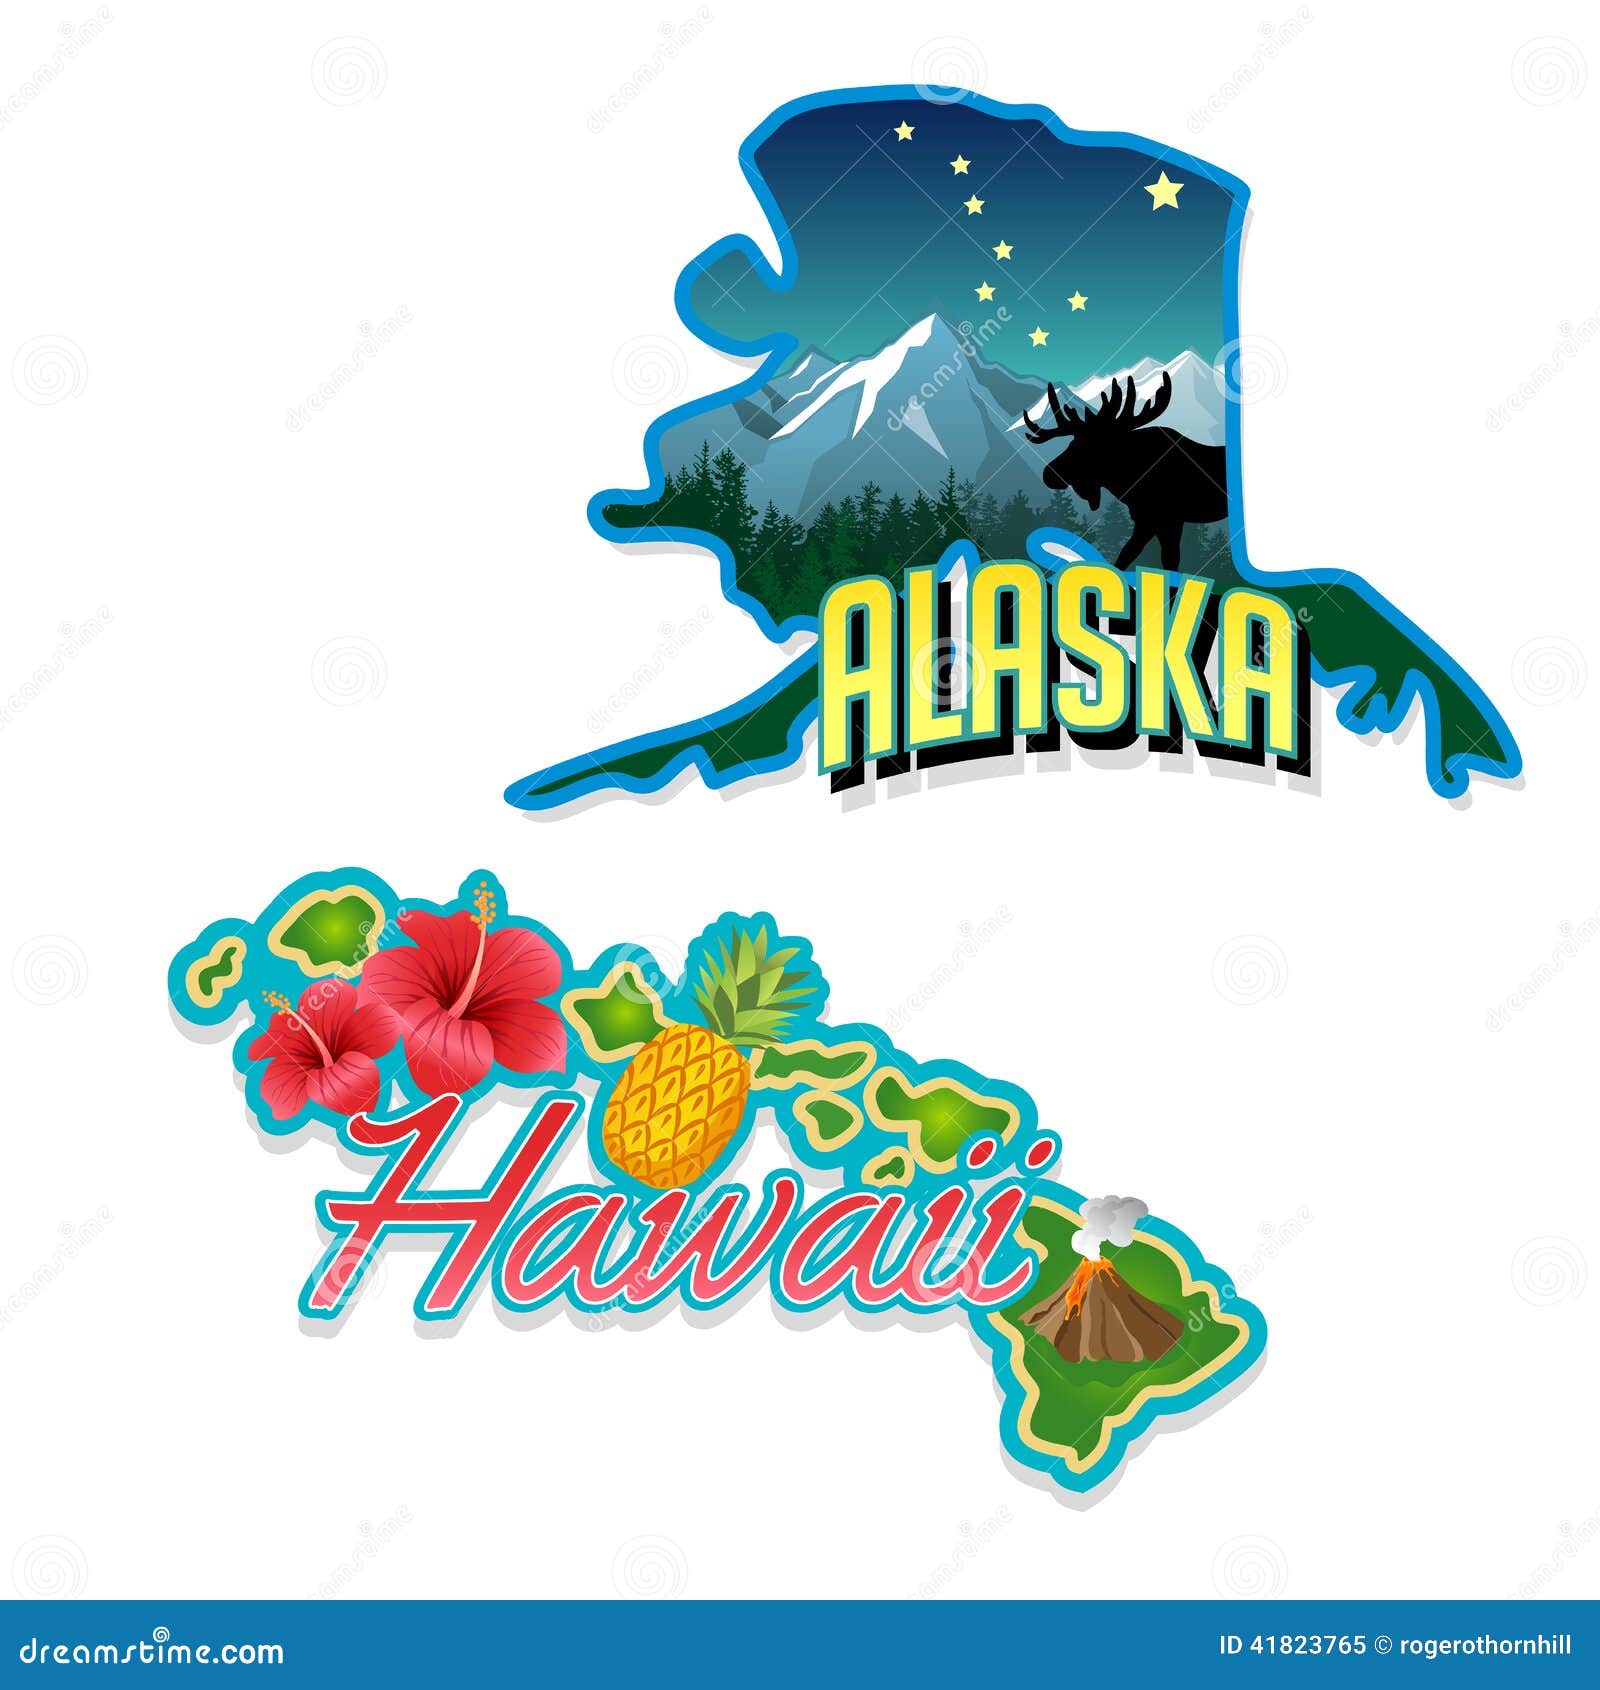 When did Alaska and Hawaii become states?